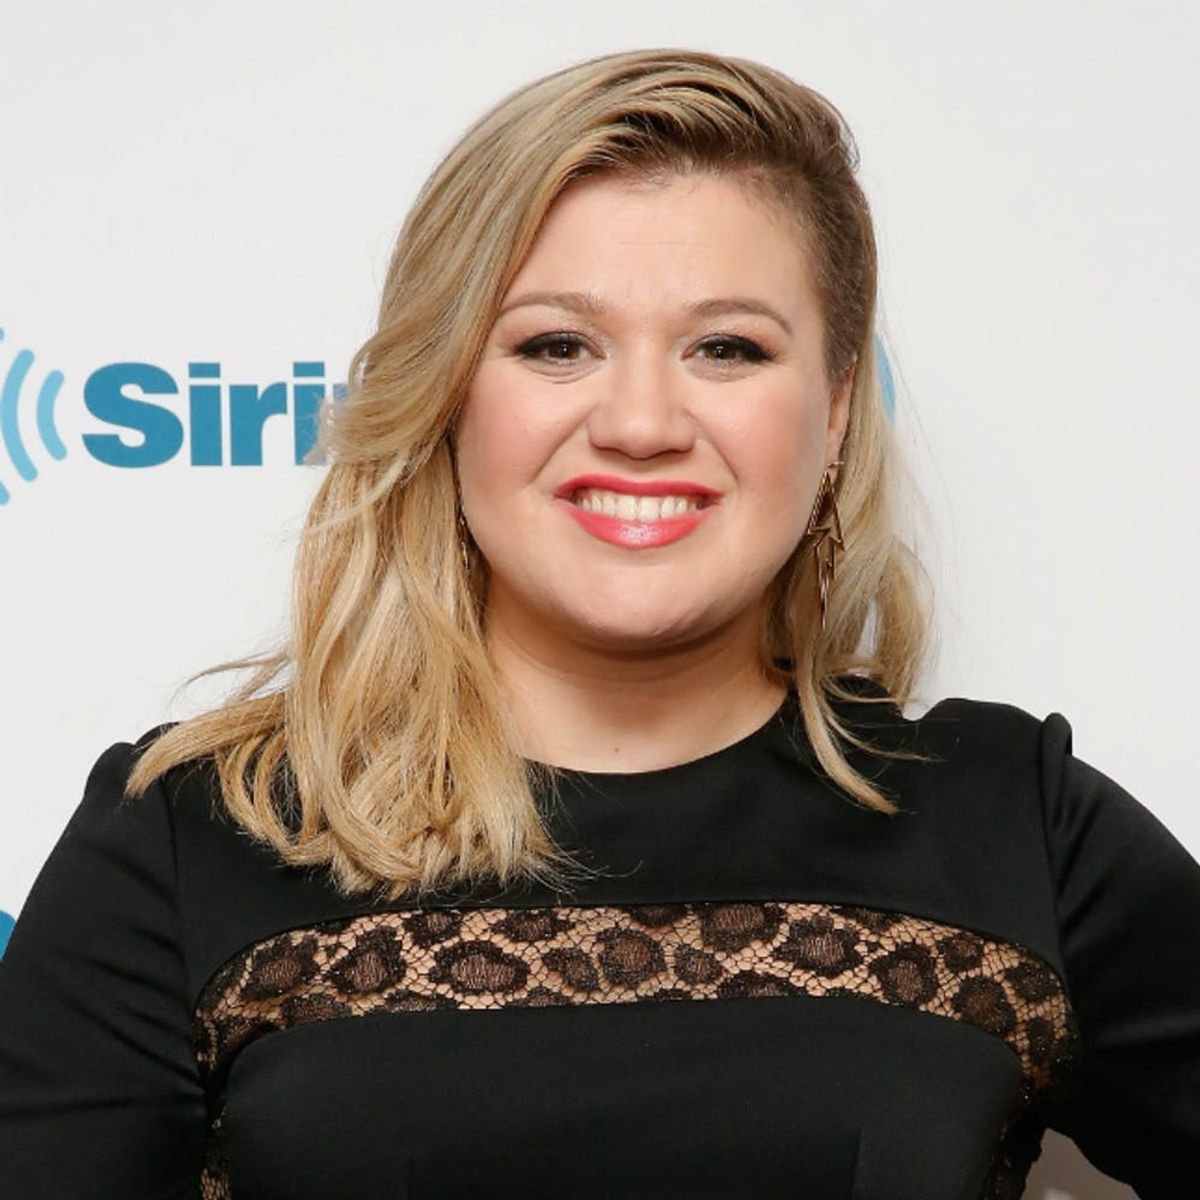 Kelly Clarkson’s Creative Family Christmas Card Might Hint at a Baby Name